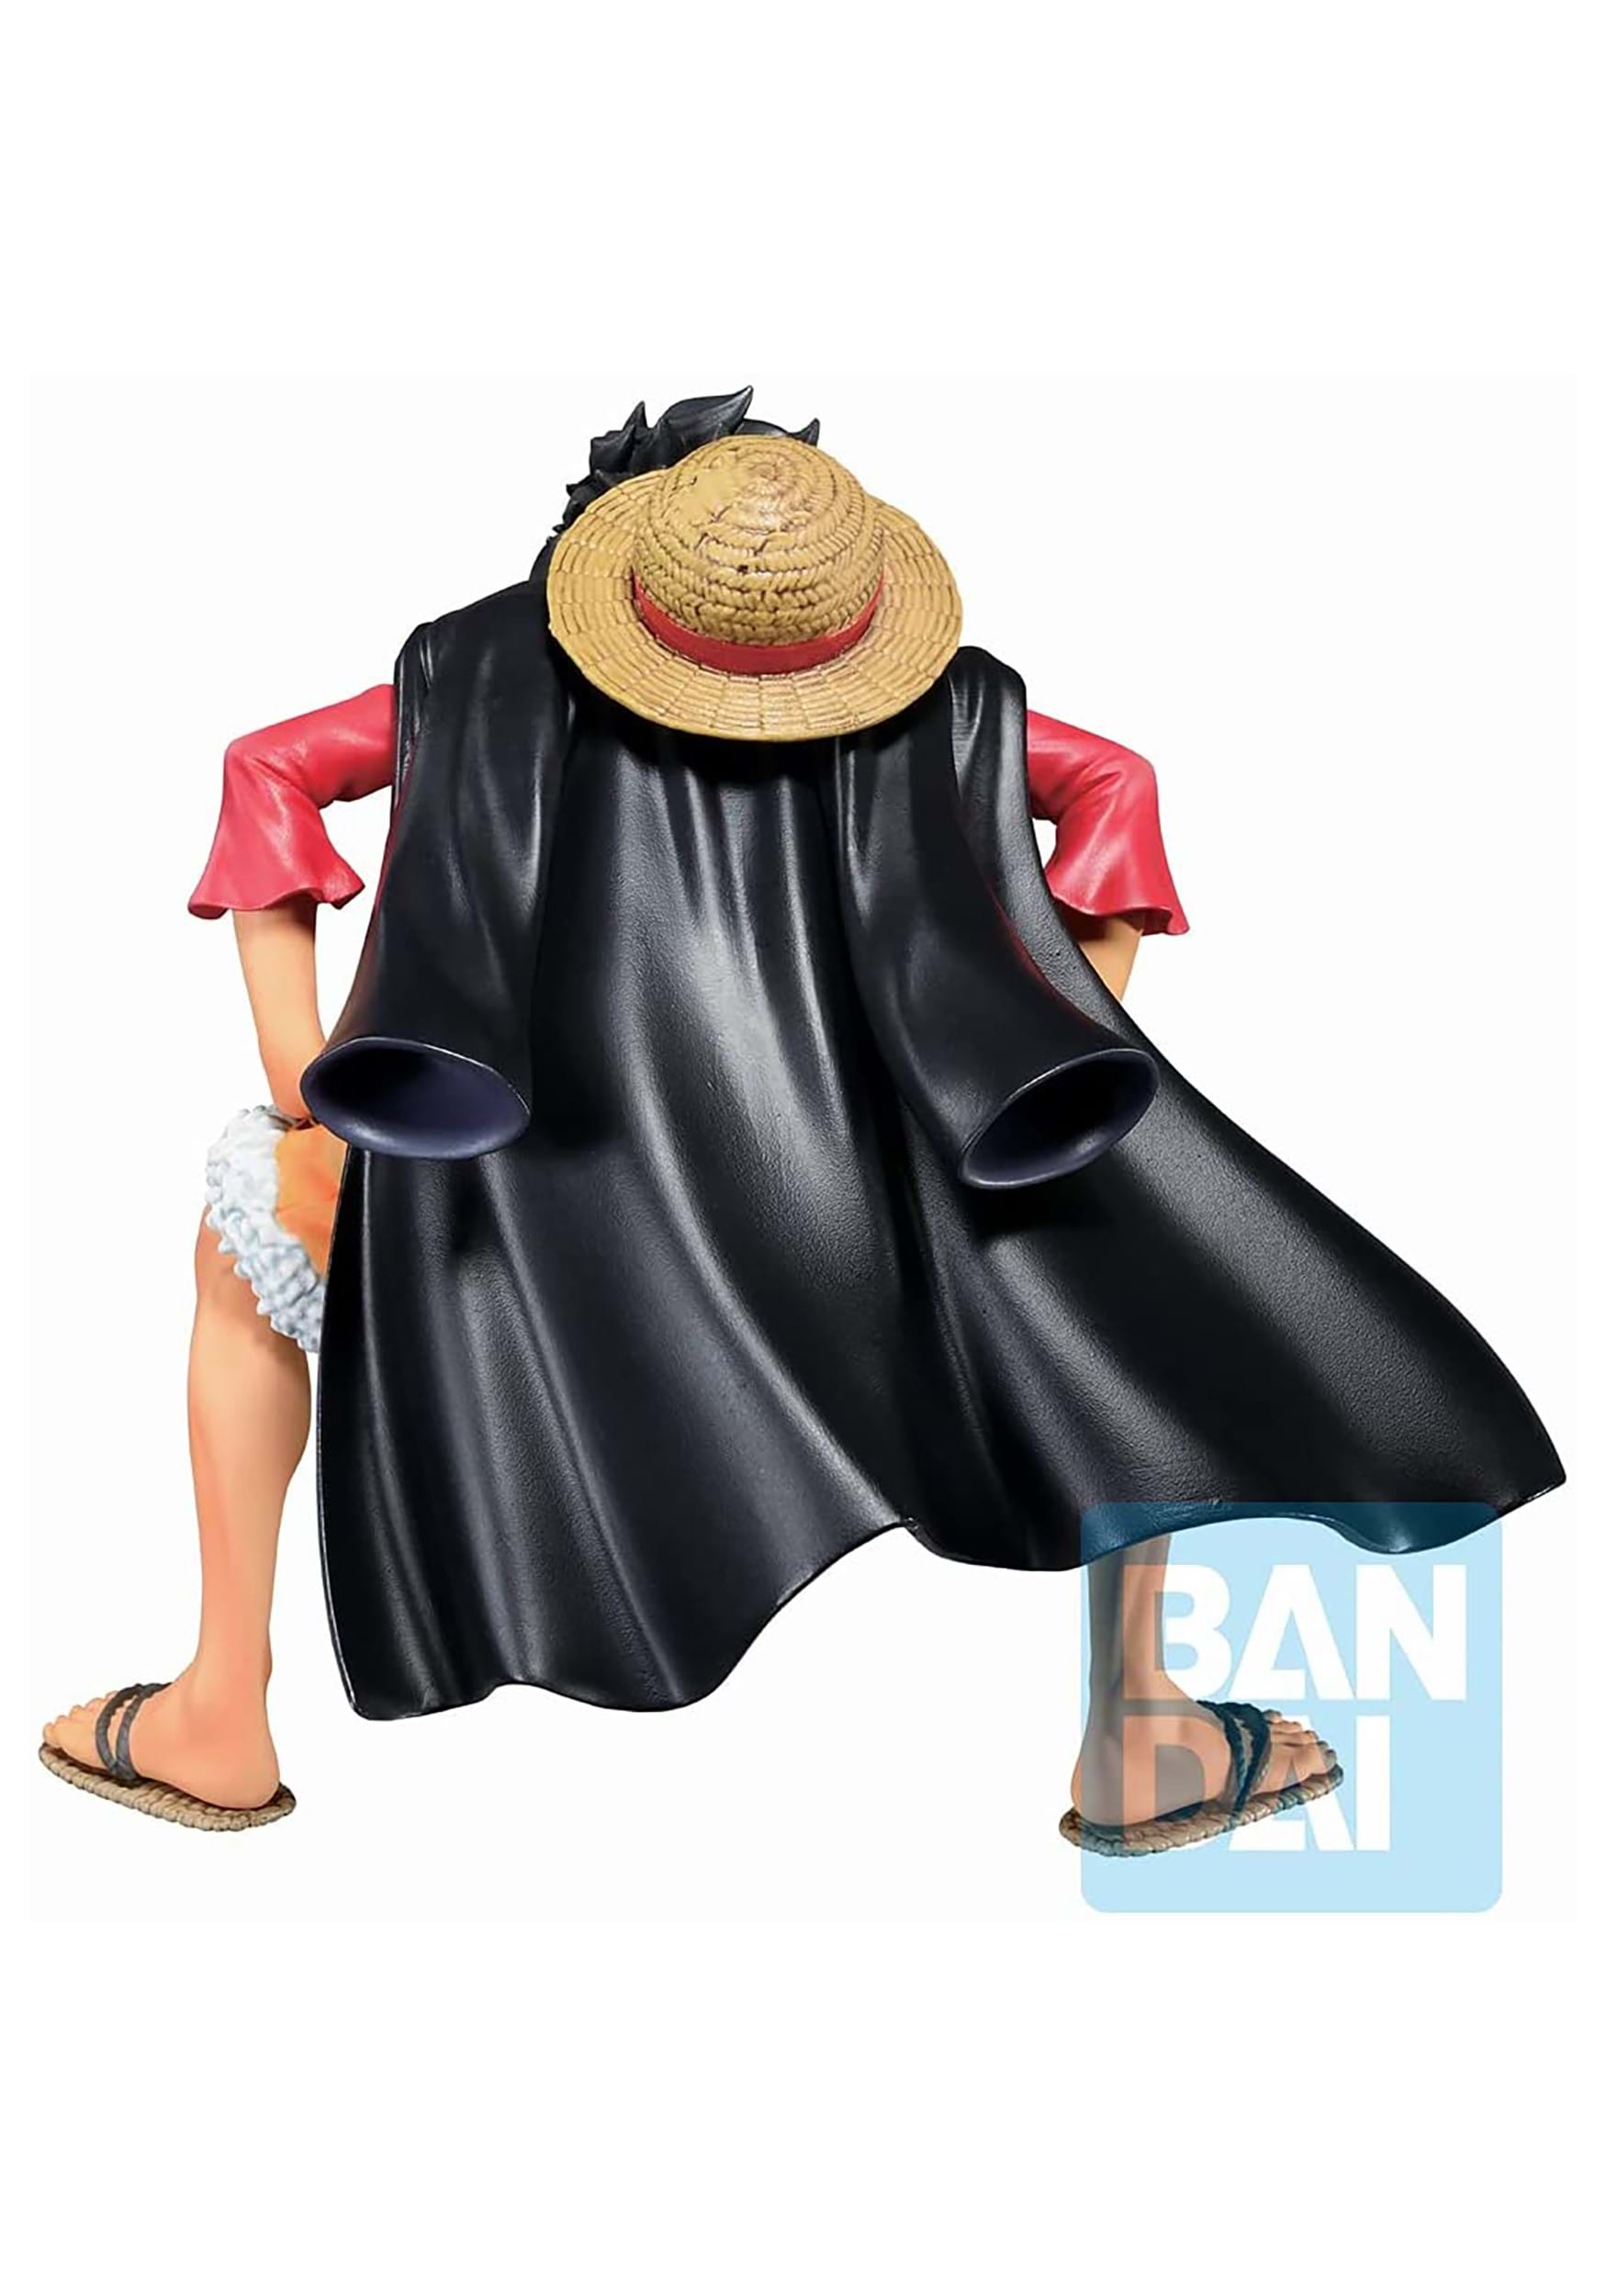 NINJAMO Monkey D Luffy Action Figure One Anime Piece Sitting Pose Mini Toy  Statue Office Decor Collectible